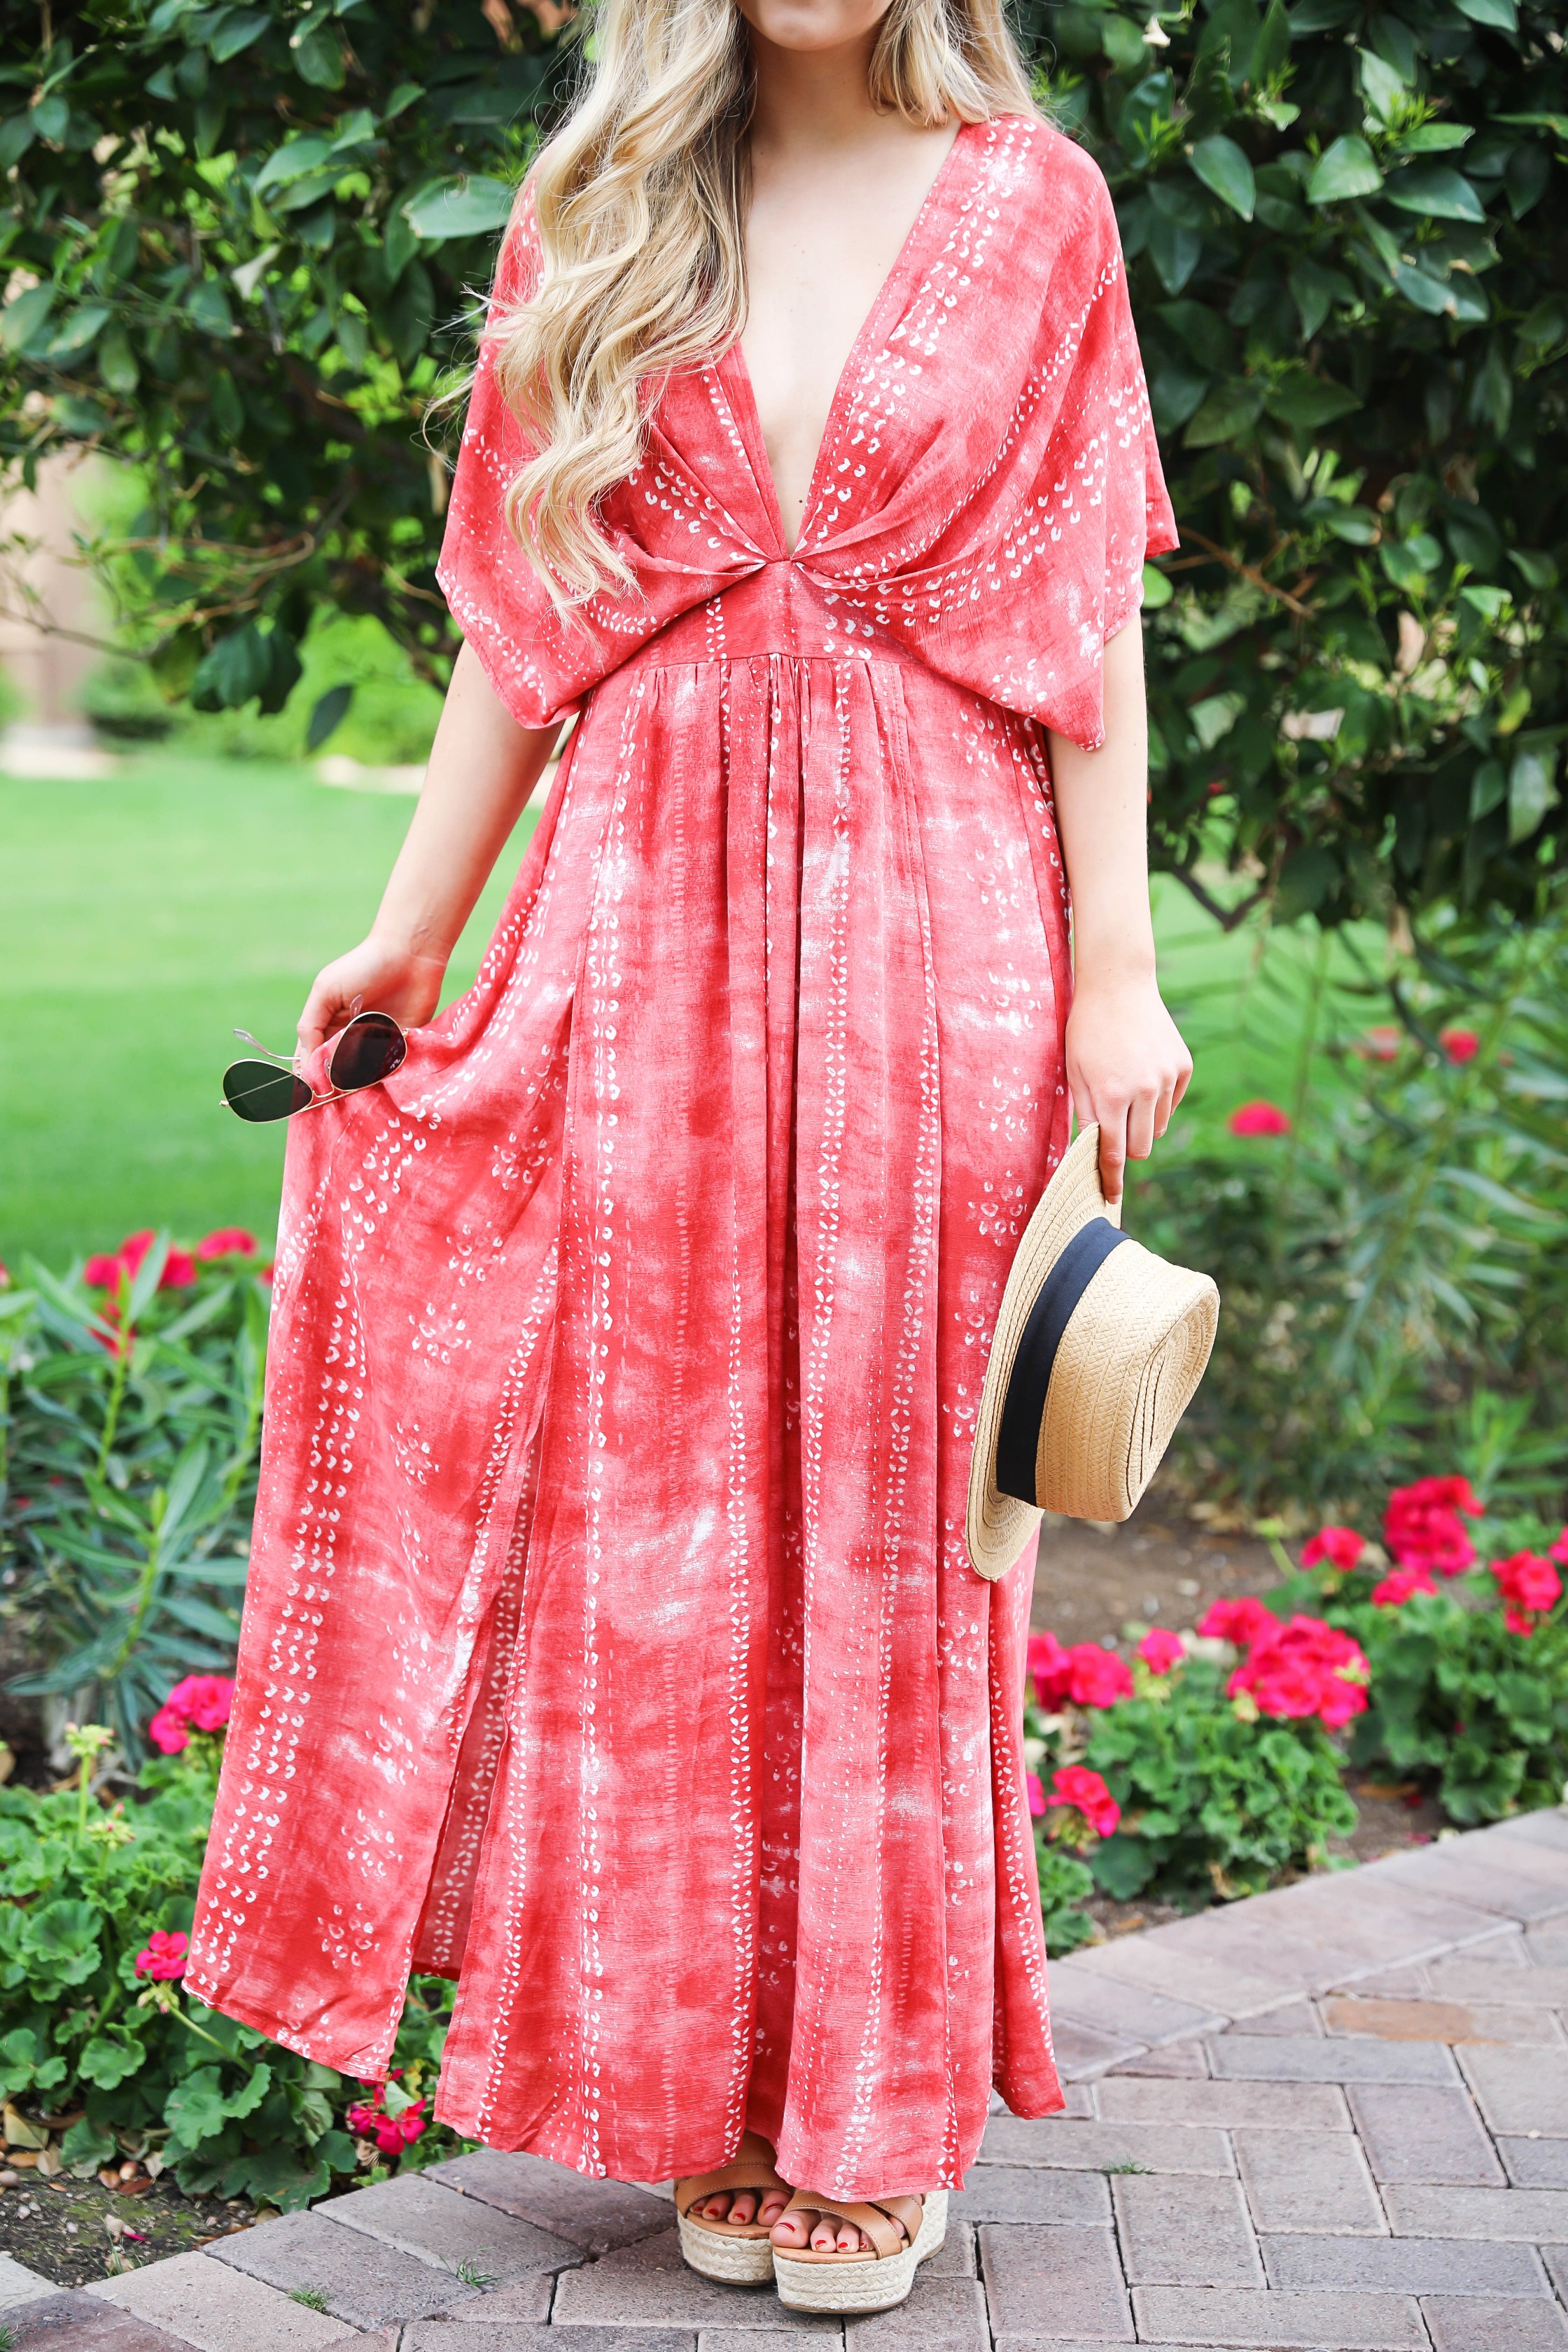 Red tie dye maxi dress from Showpo! Maxi dress with a cute plunging neckline paired with astraw hat and Marc fisher wedges! Details on fashion blog daily dose of charm by lauren lindmark spring break outfit ideas